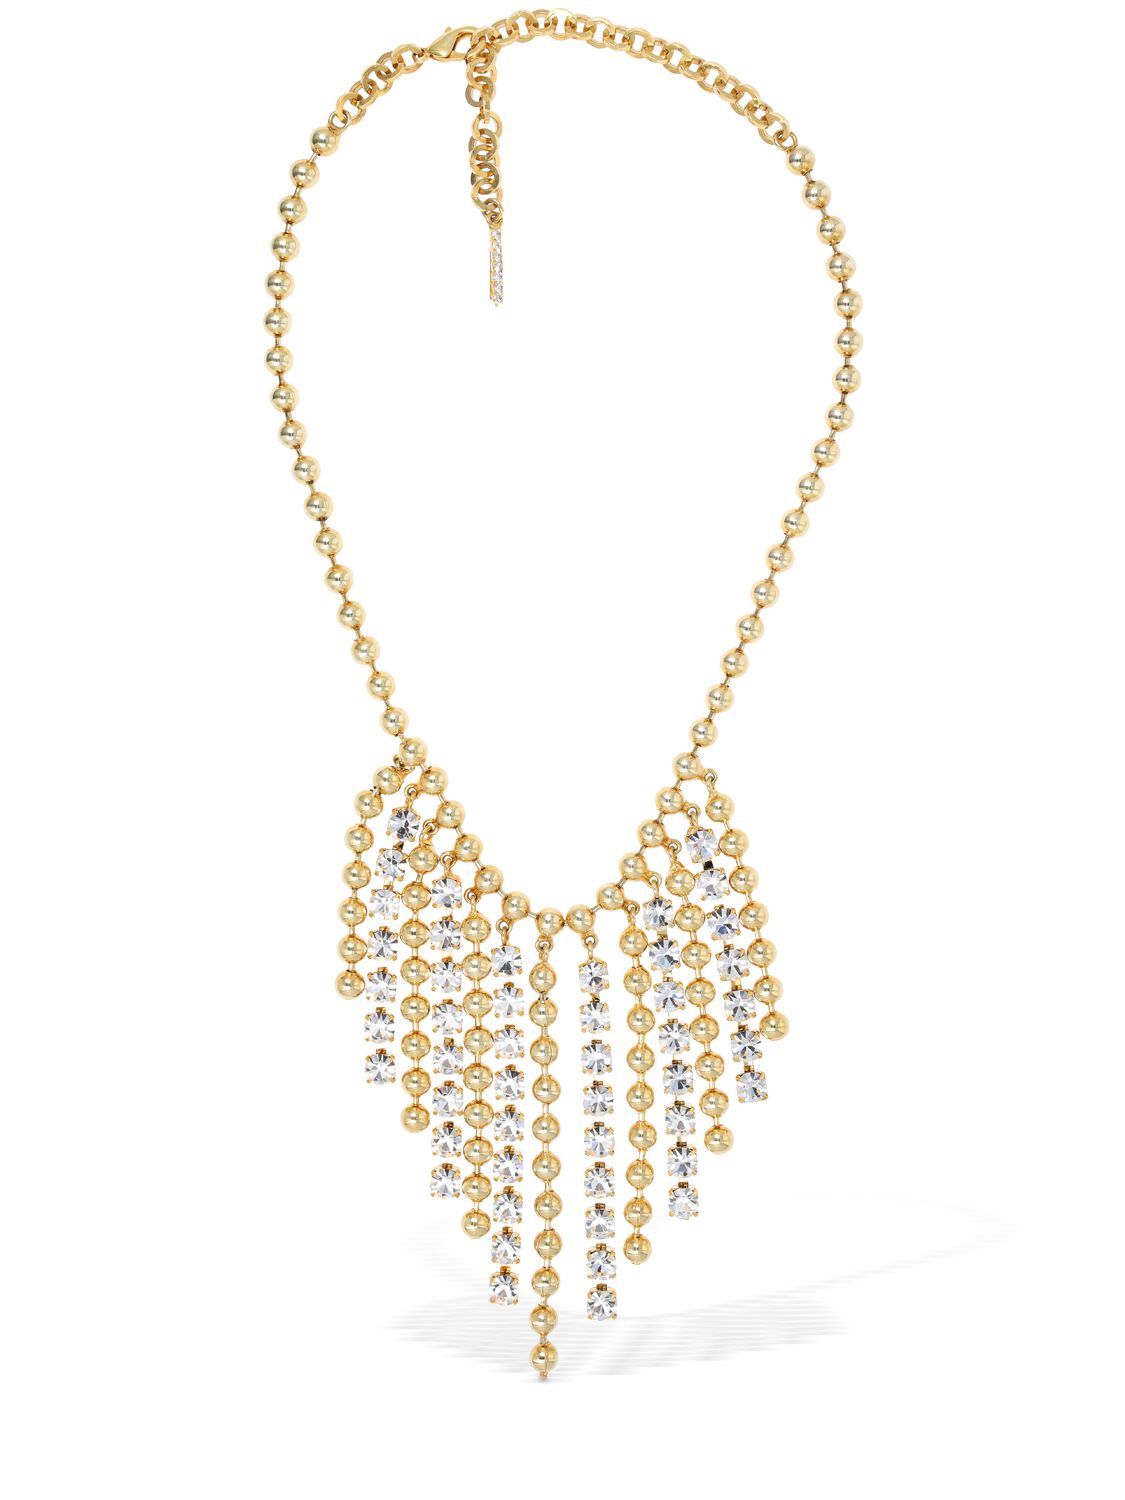 Crystal & Chain Fringes Necklace